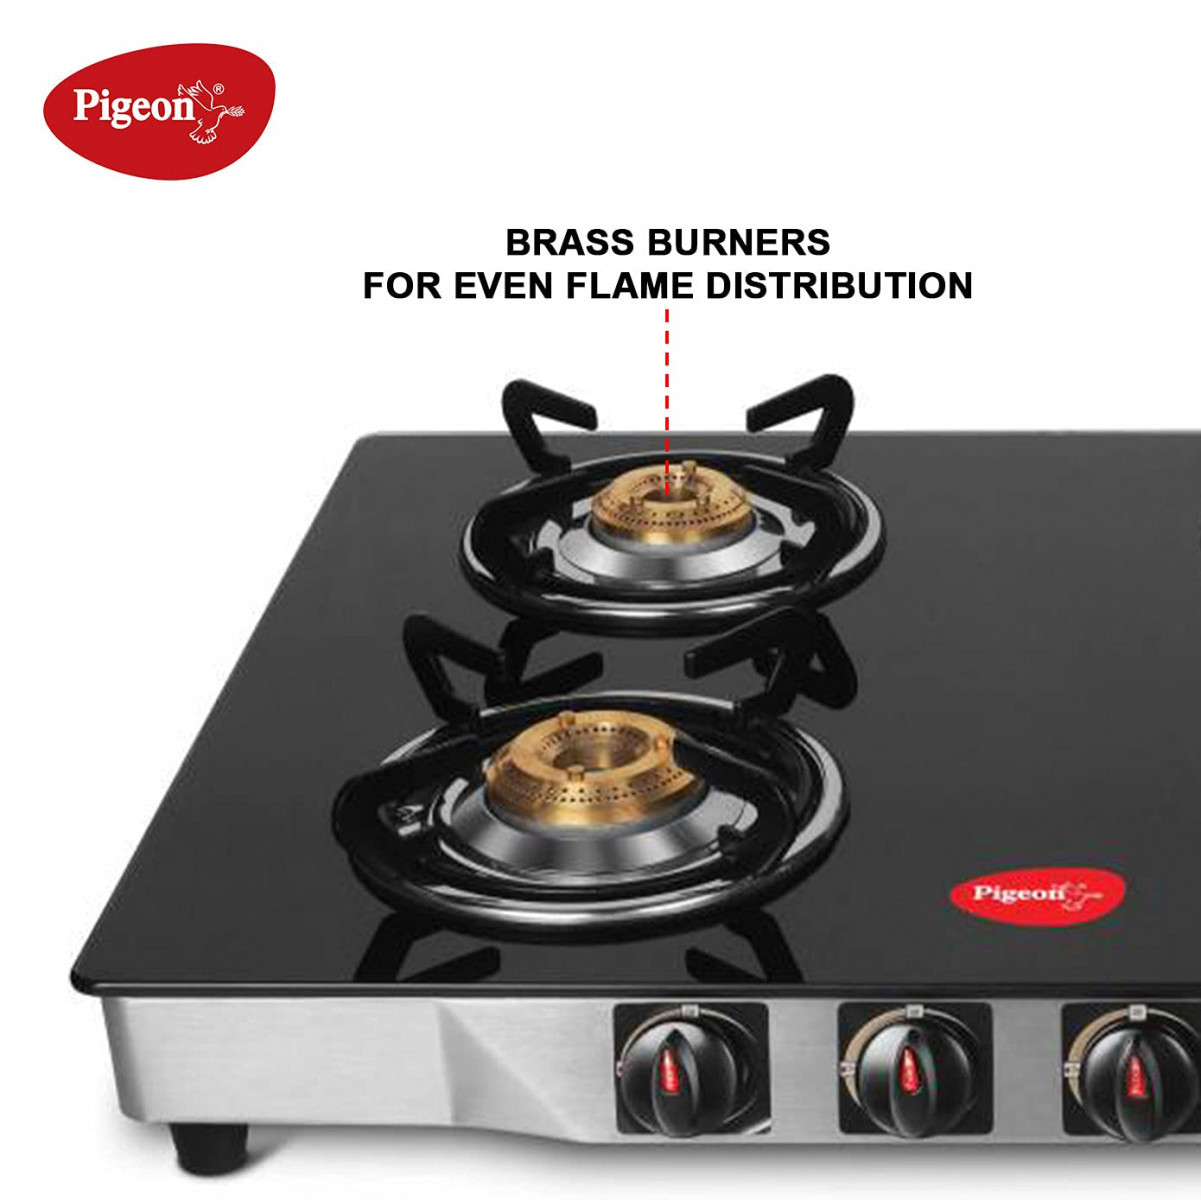 Pigeon by Stovekraft Blaze Gas Stove with High Powered 4 Brass Burner Glass Cooktop has Glass Top